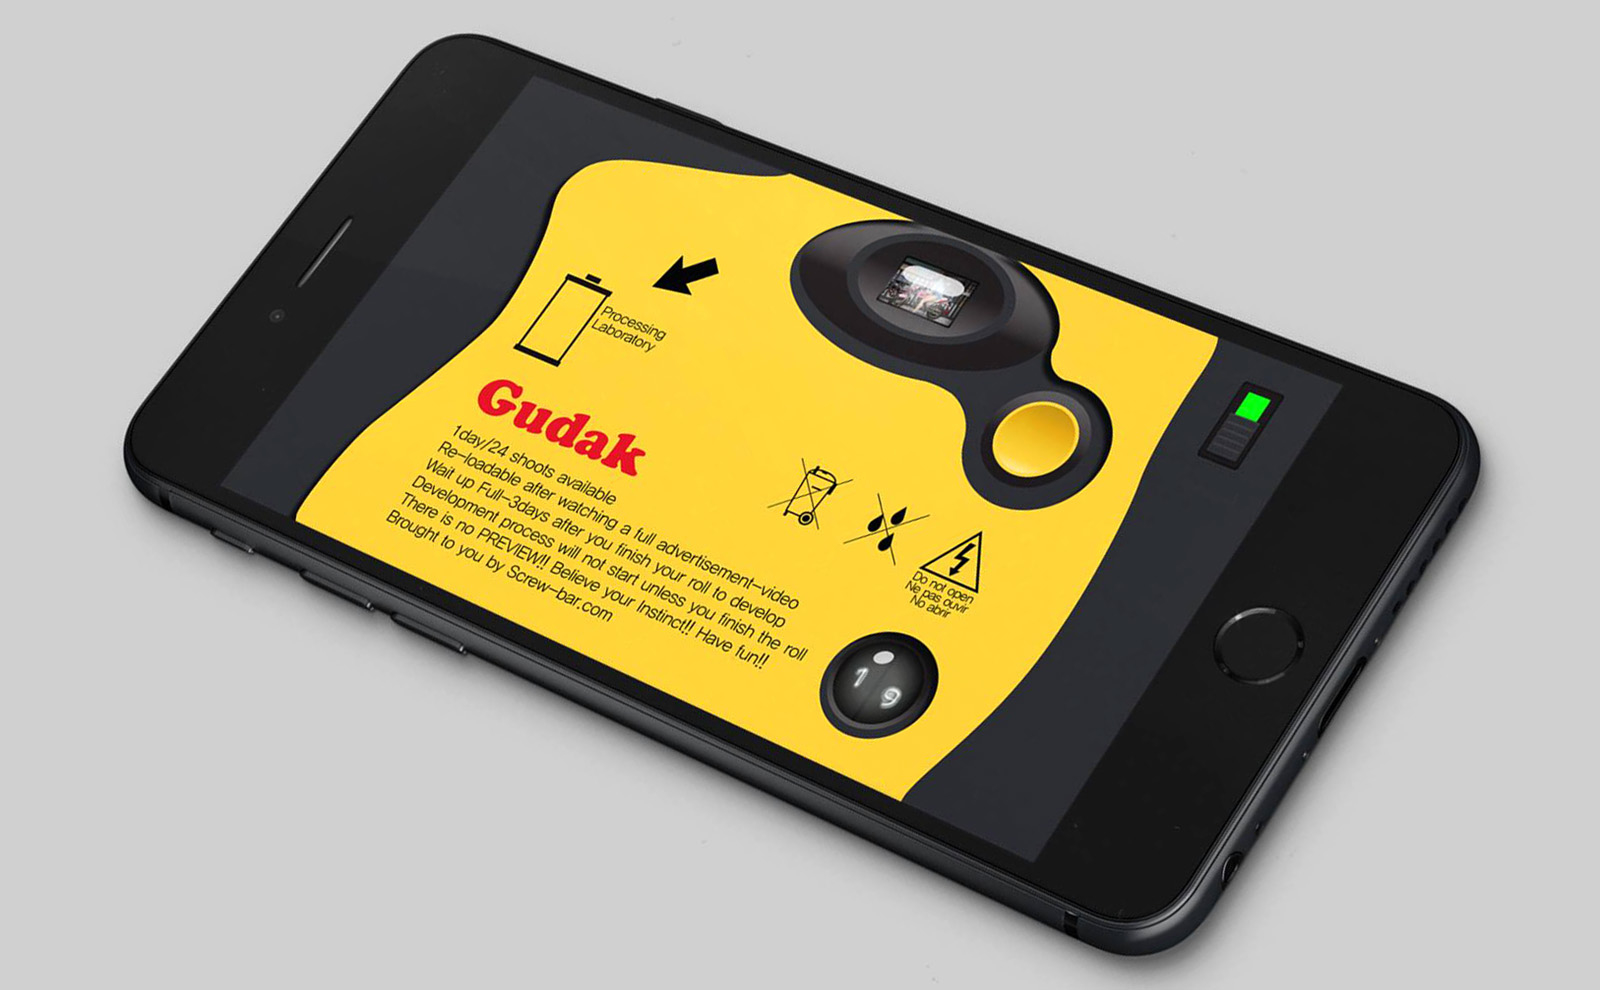 Gudak Cam is the app for those who want to relive the nostalgic times of analog cameras